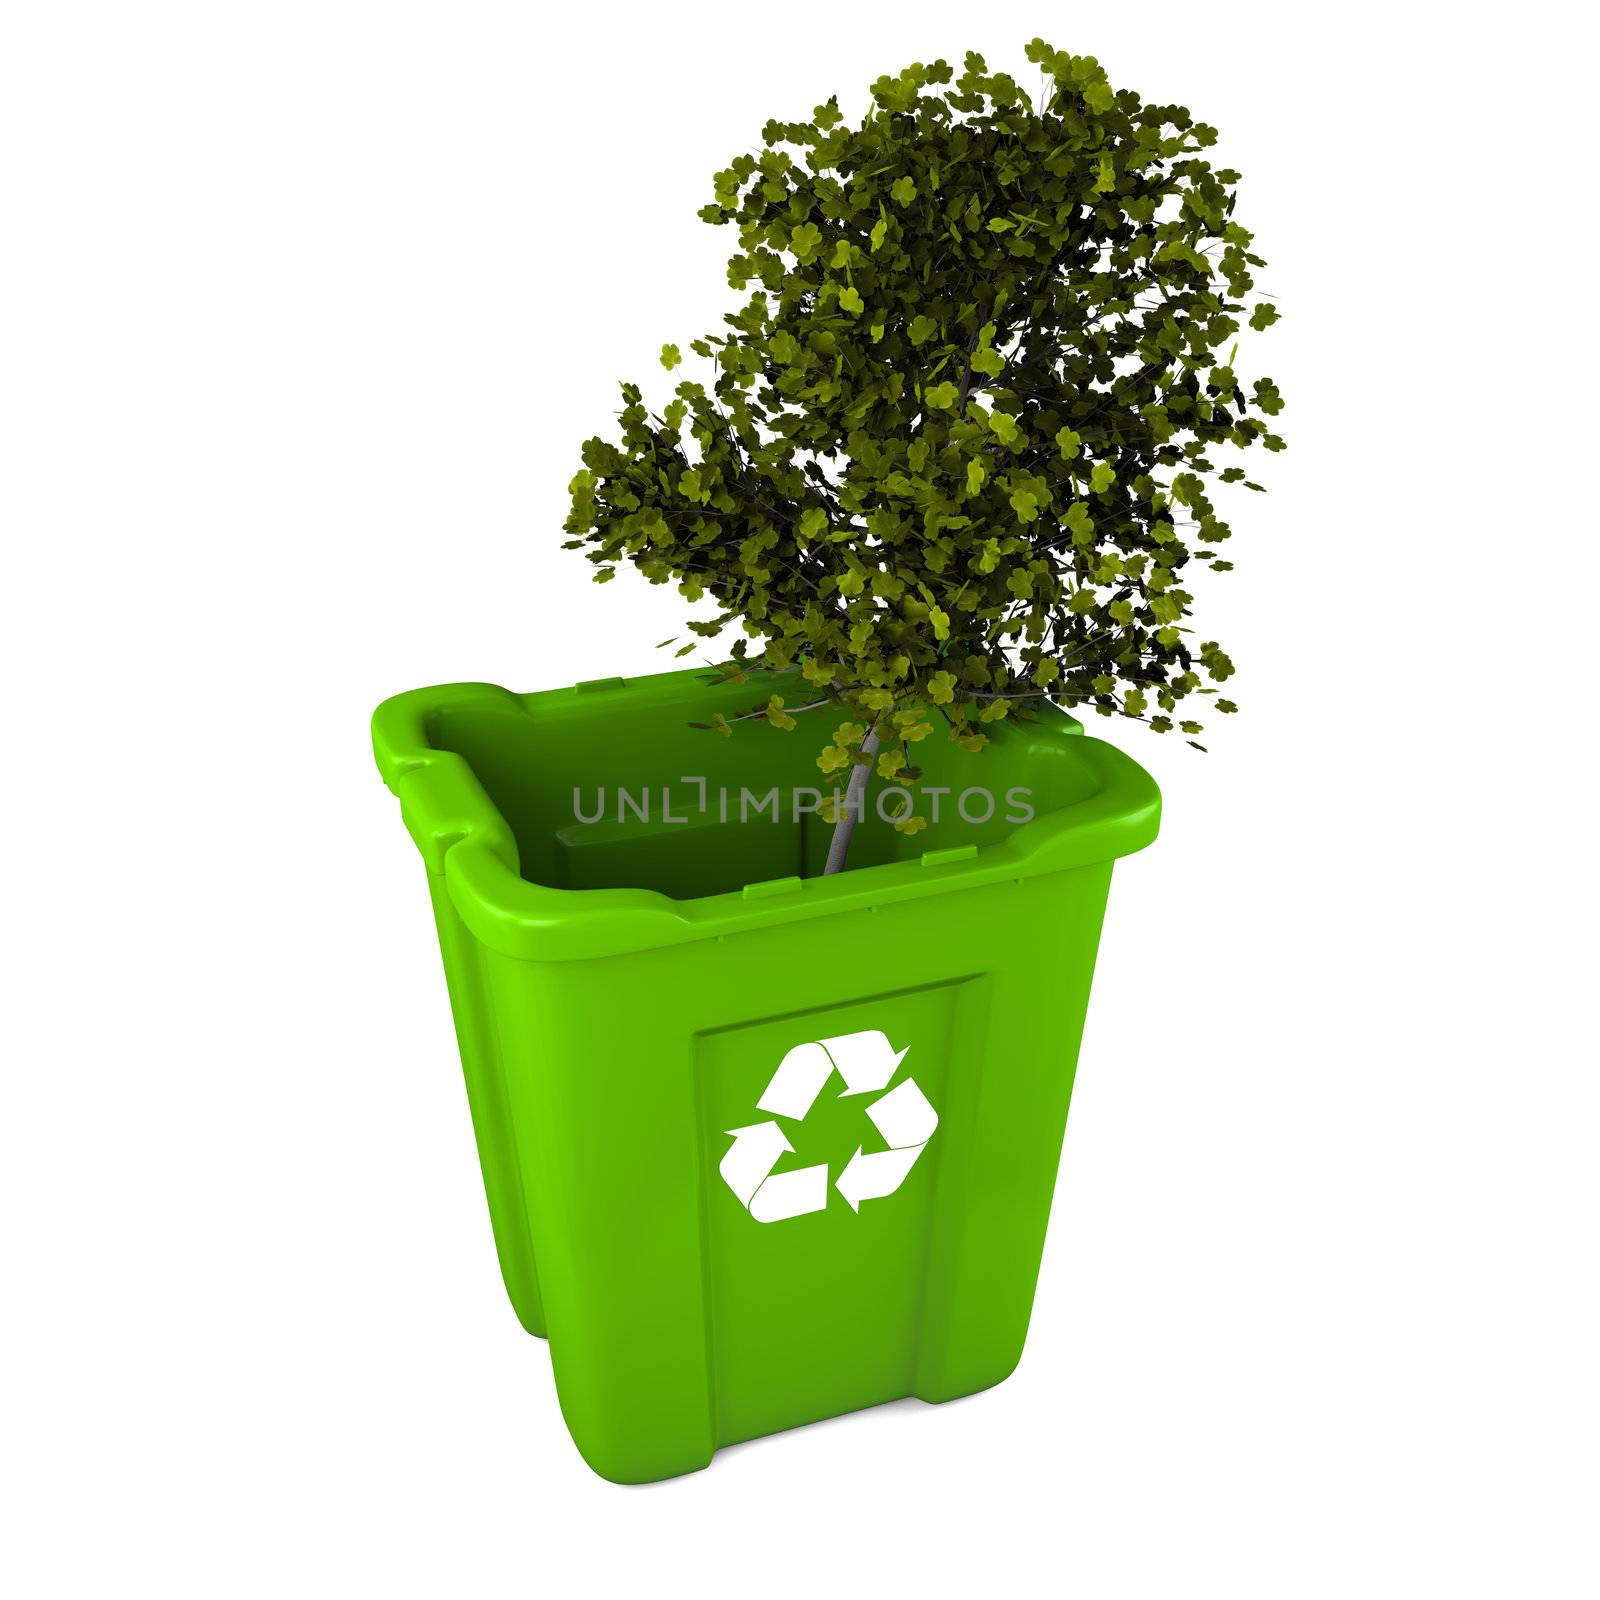 Paper recycling concept with Italian Maple tree in green plastic recycle bin